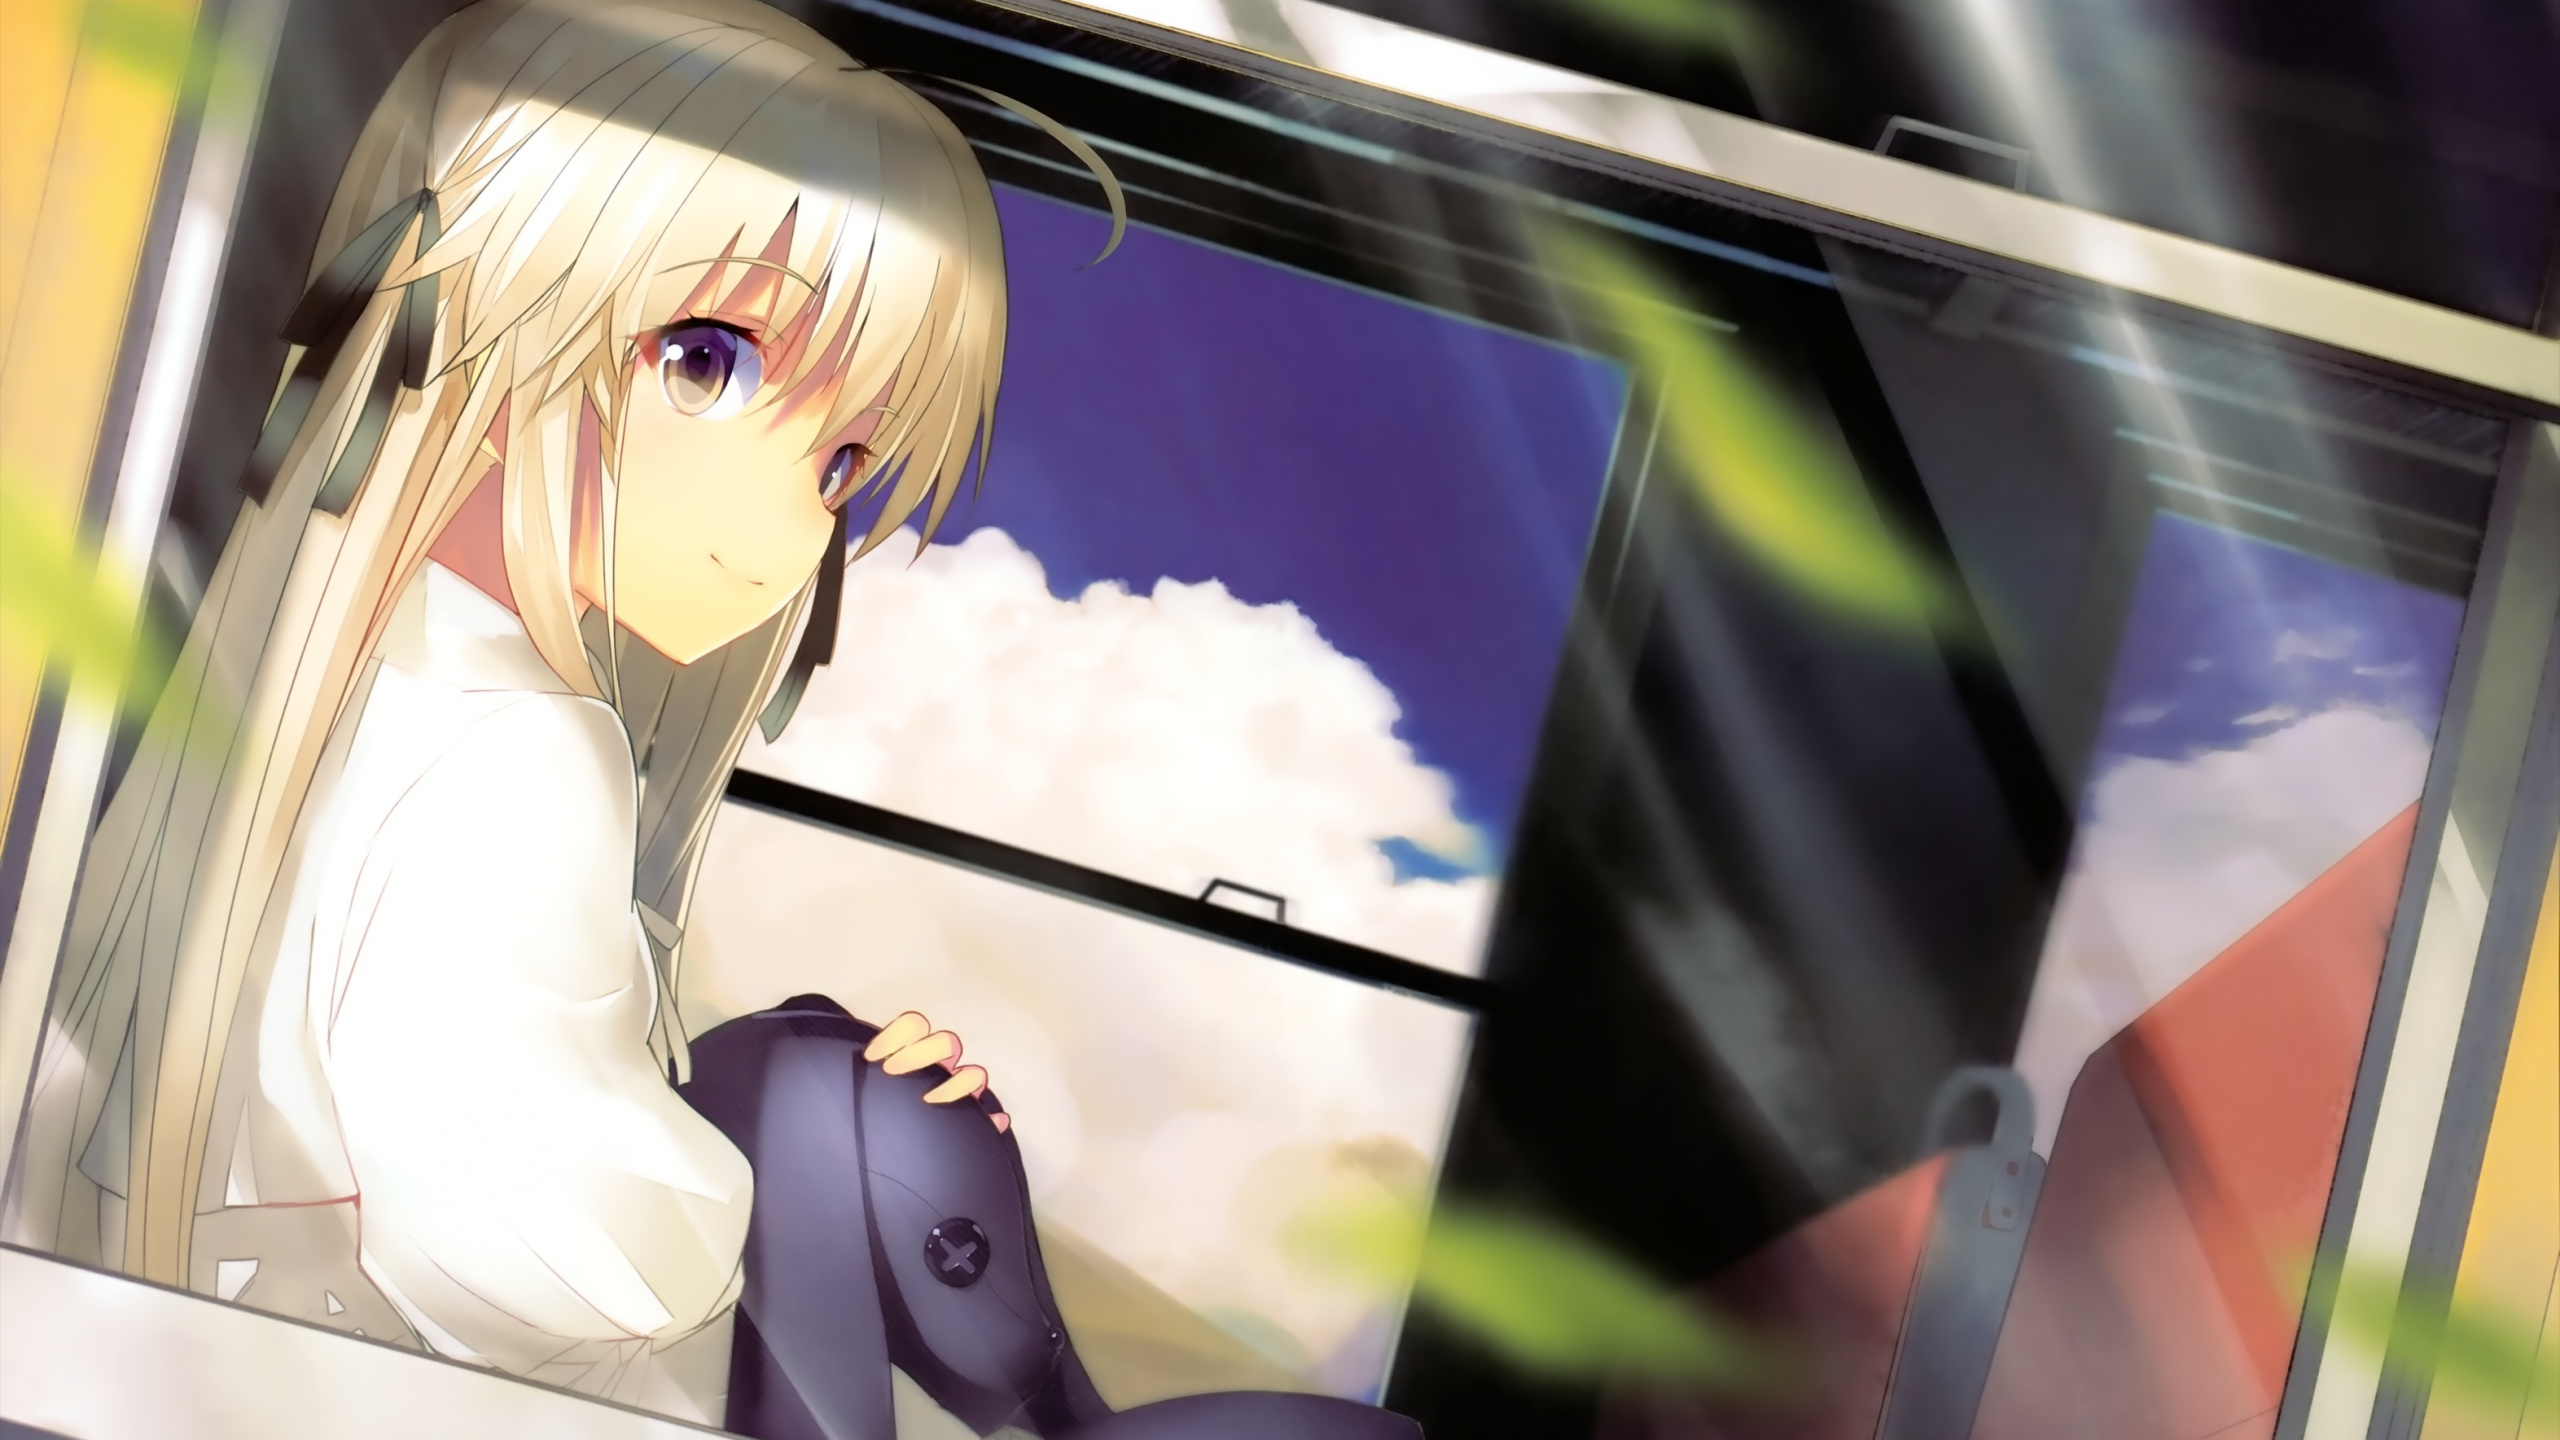 Blonde Haired Woman in White Long Sleeve Shirt Anime Character. Wallpaper in 2560x1440 Resolution